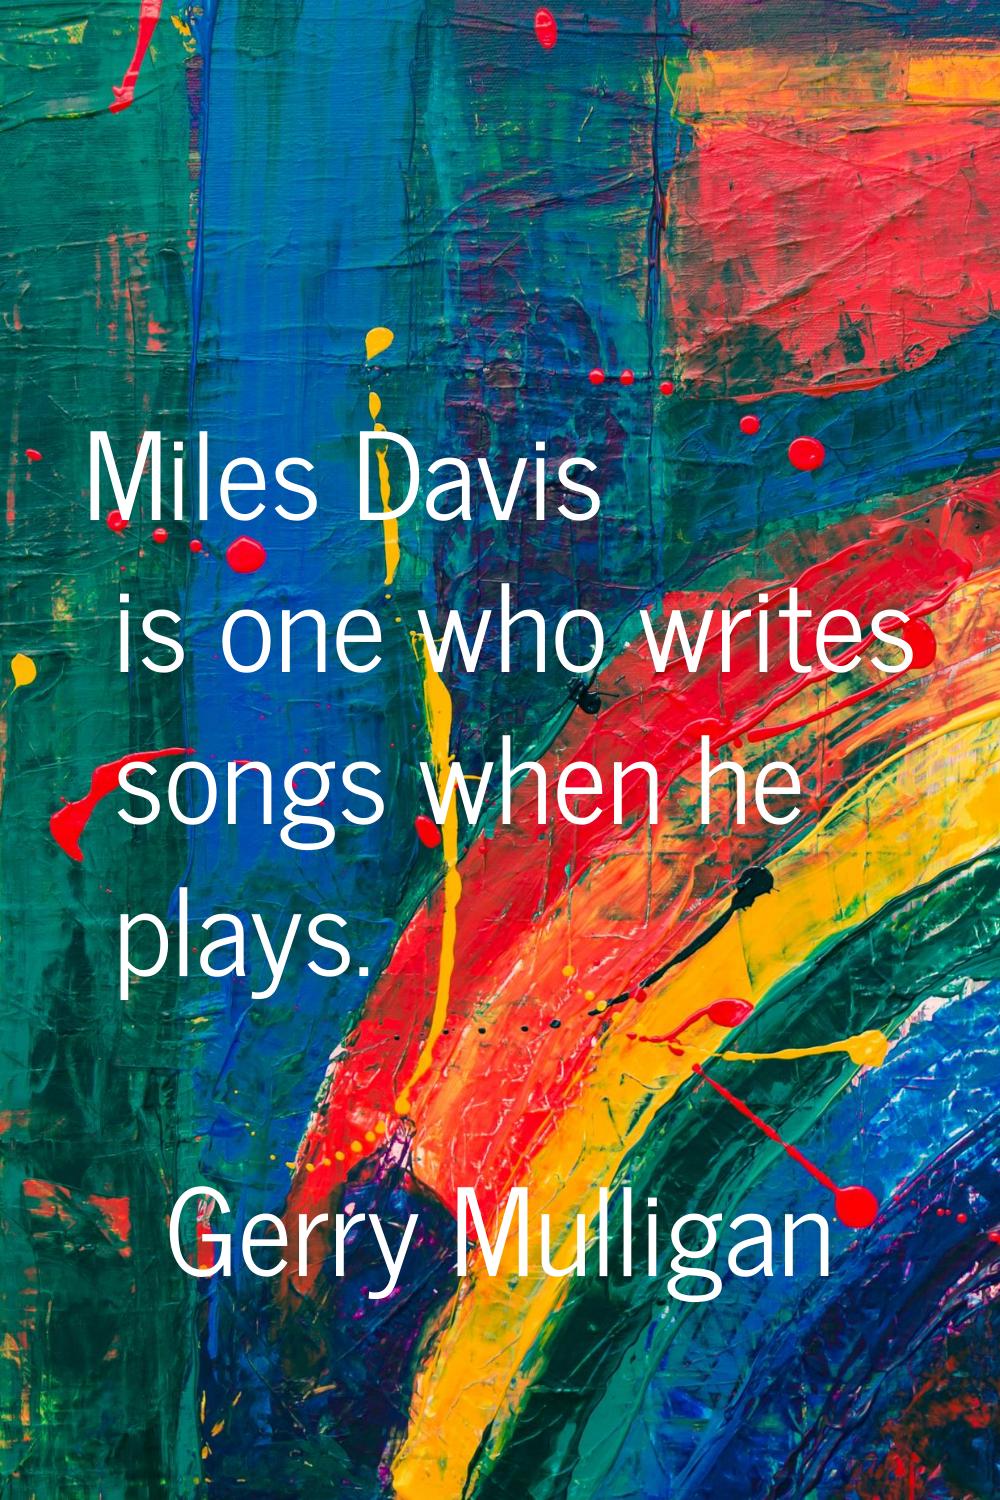 Miles Davis is one who writes songs when he plays.